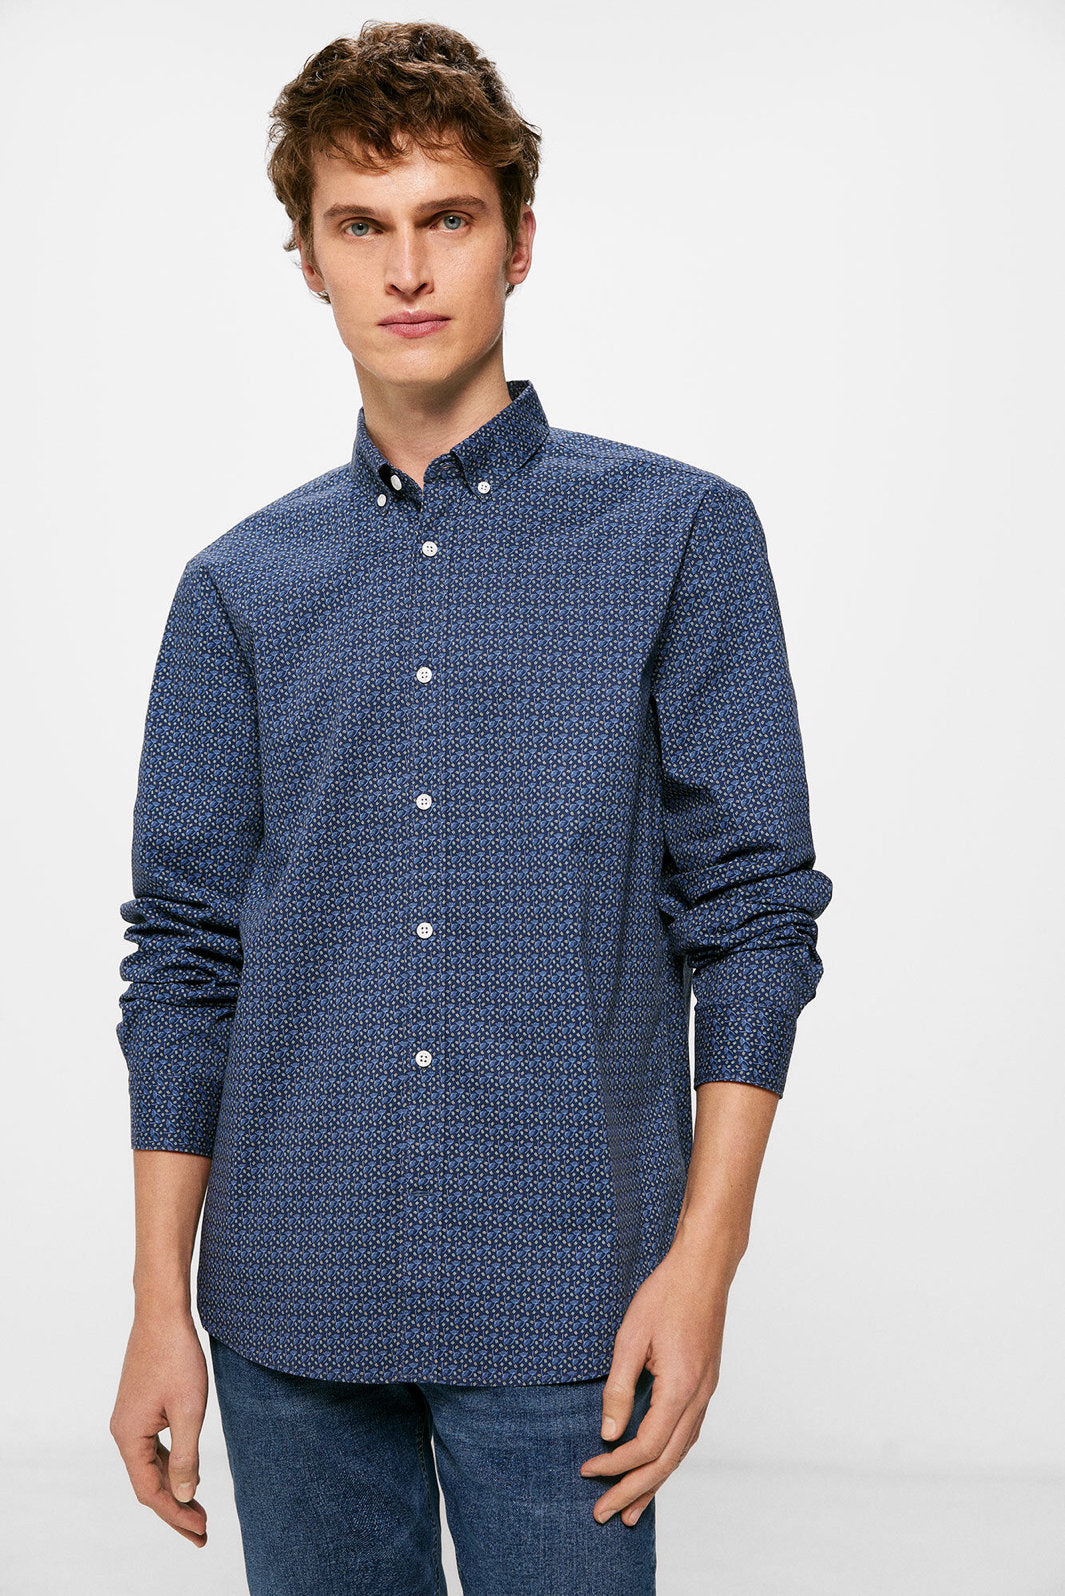 Button Down Shirt With All Over Print_1517702_11_01